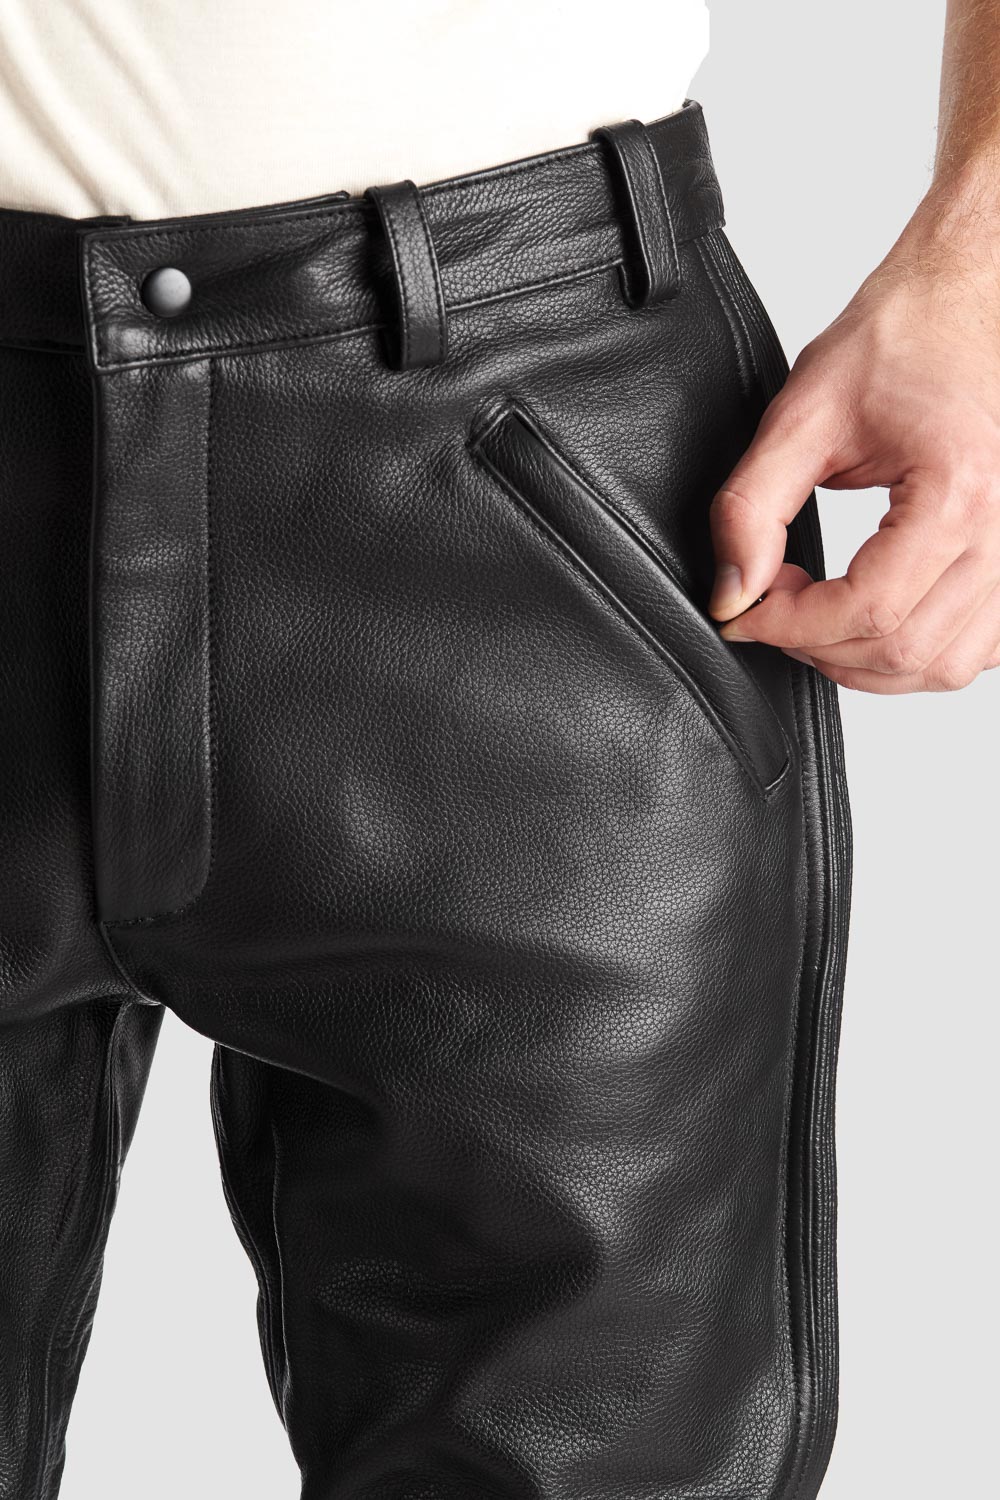 Men's Real Leather Genuine Sheep Leather Party Pants Slim Fit Real Leather  Pant | eBay